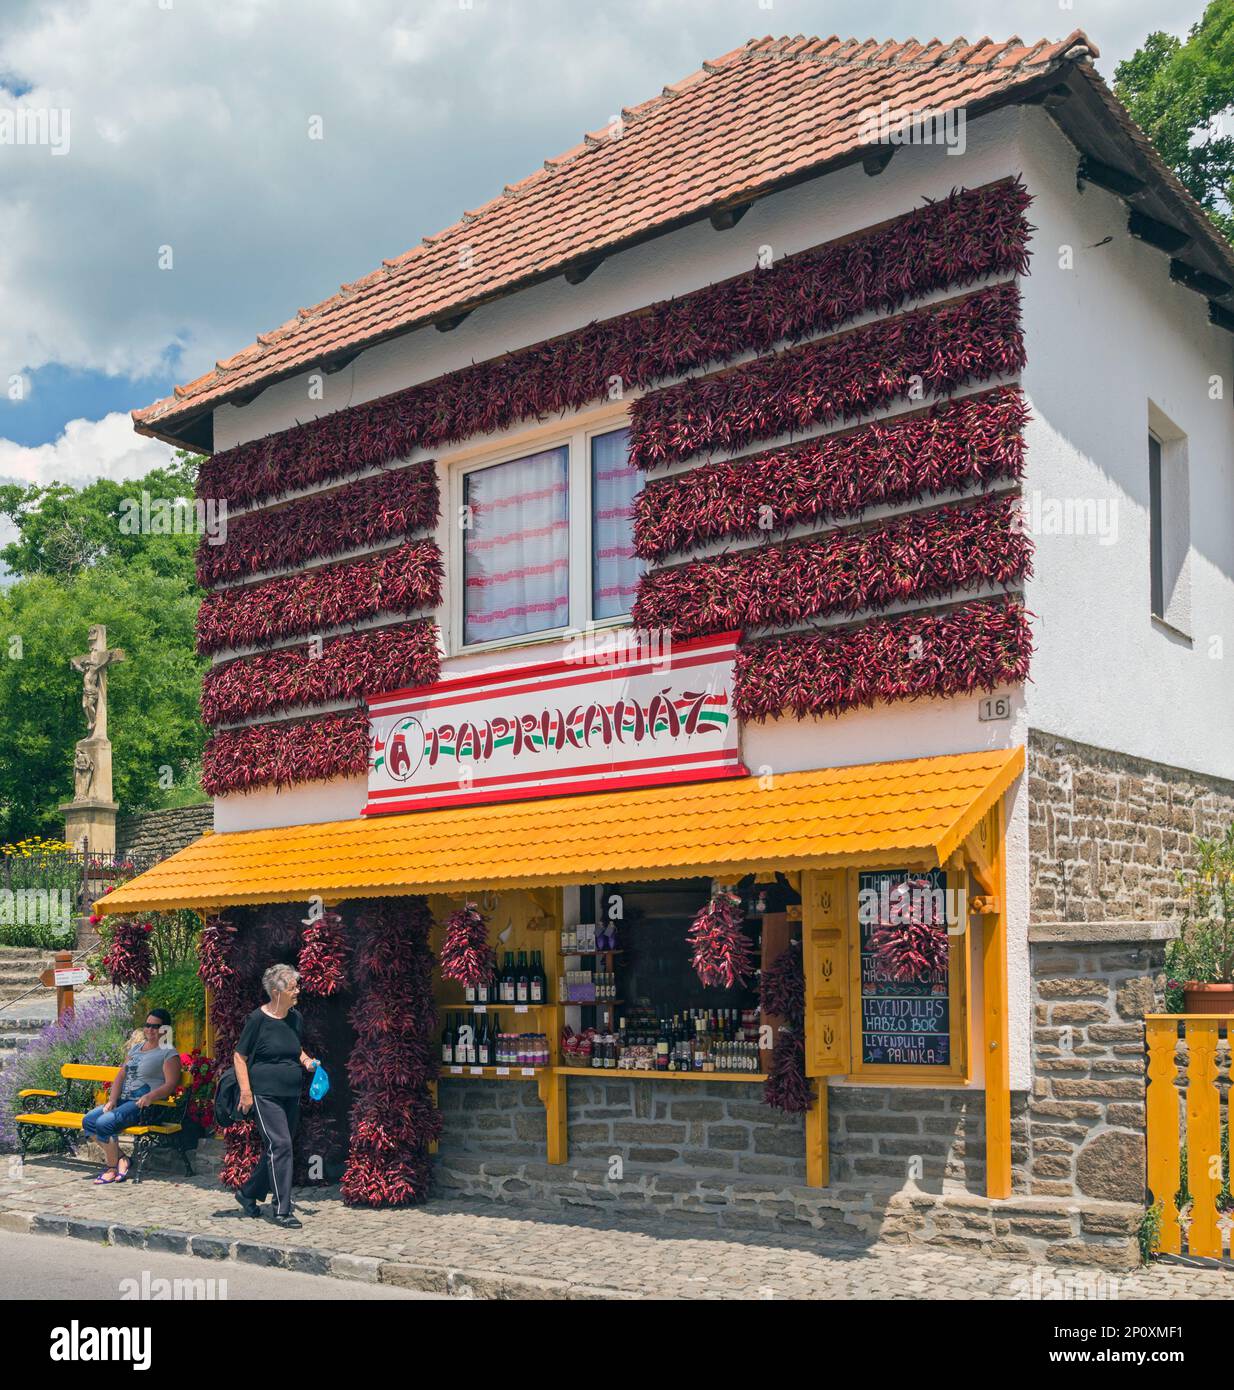 Tihany village, on shores of Lake Balaton, Tihany Peninsula, Hungary.  Shop specializing in the sale of peppers and paprika. Stock Photo